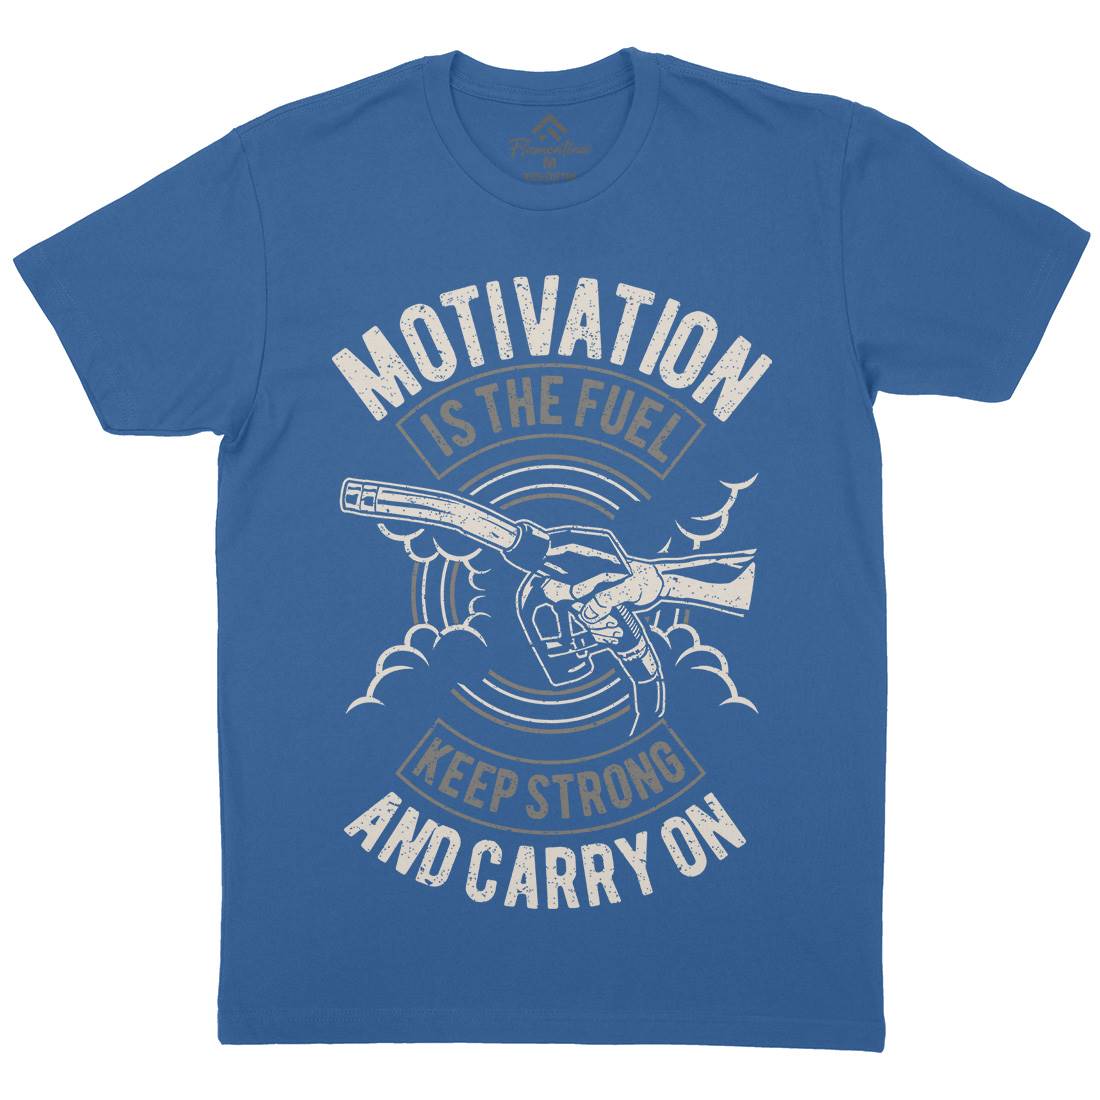 Motivation Is The Fuel Mens Organic Crew Neck T-Shirt Gym A717